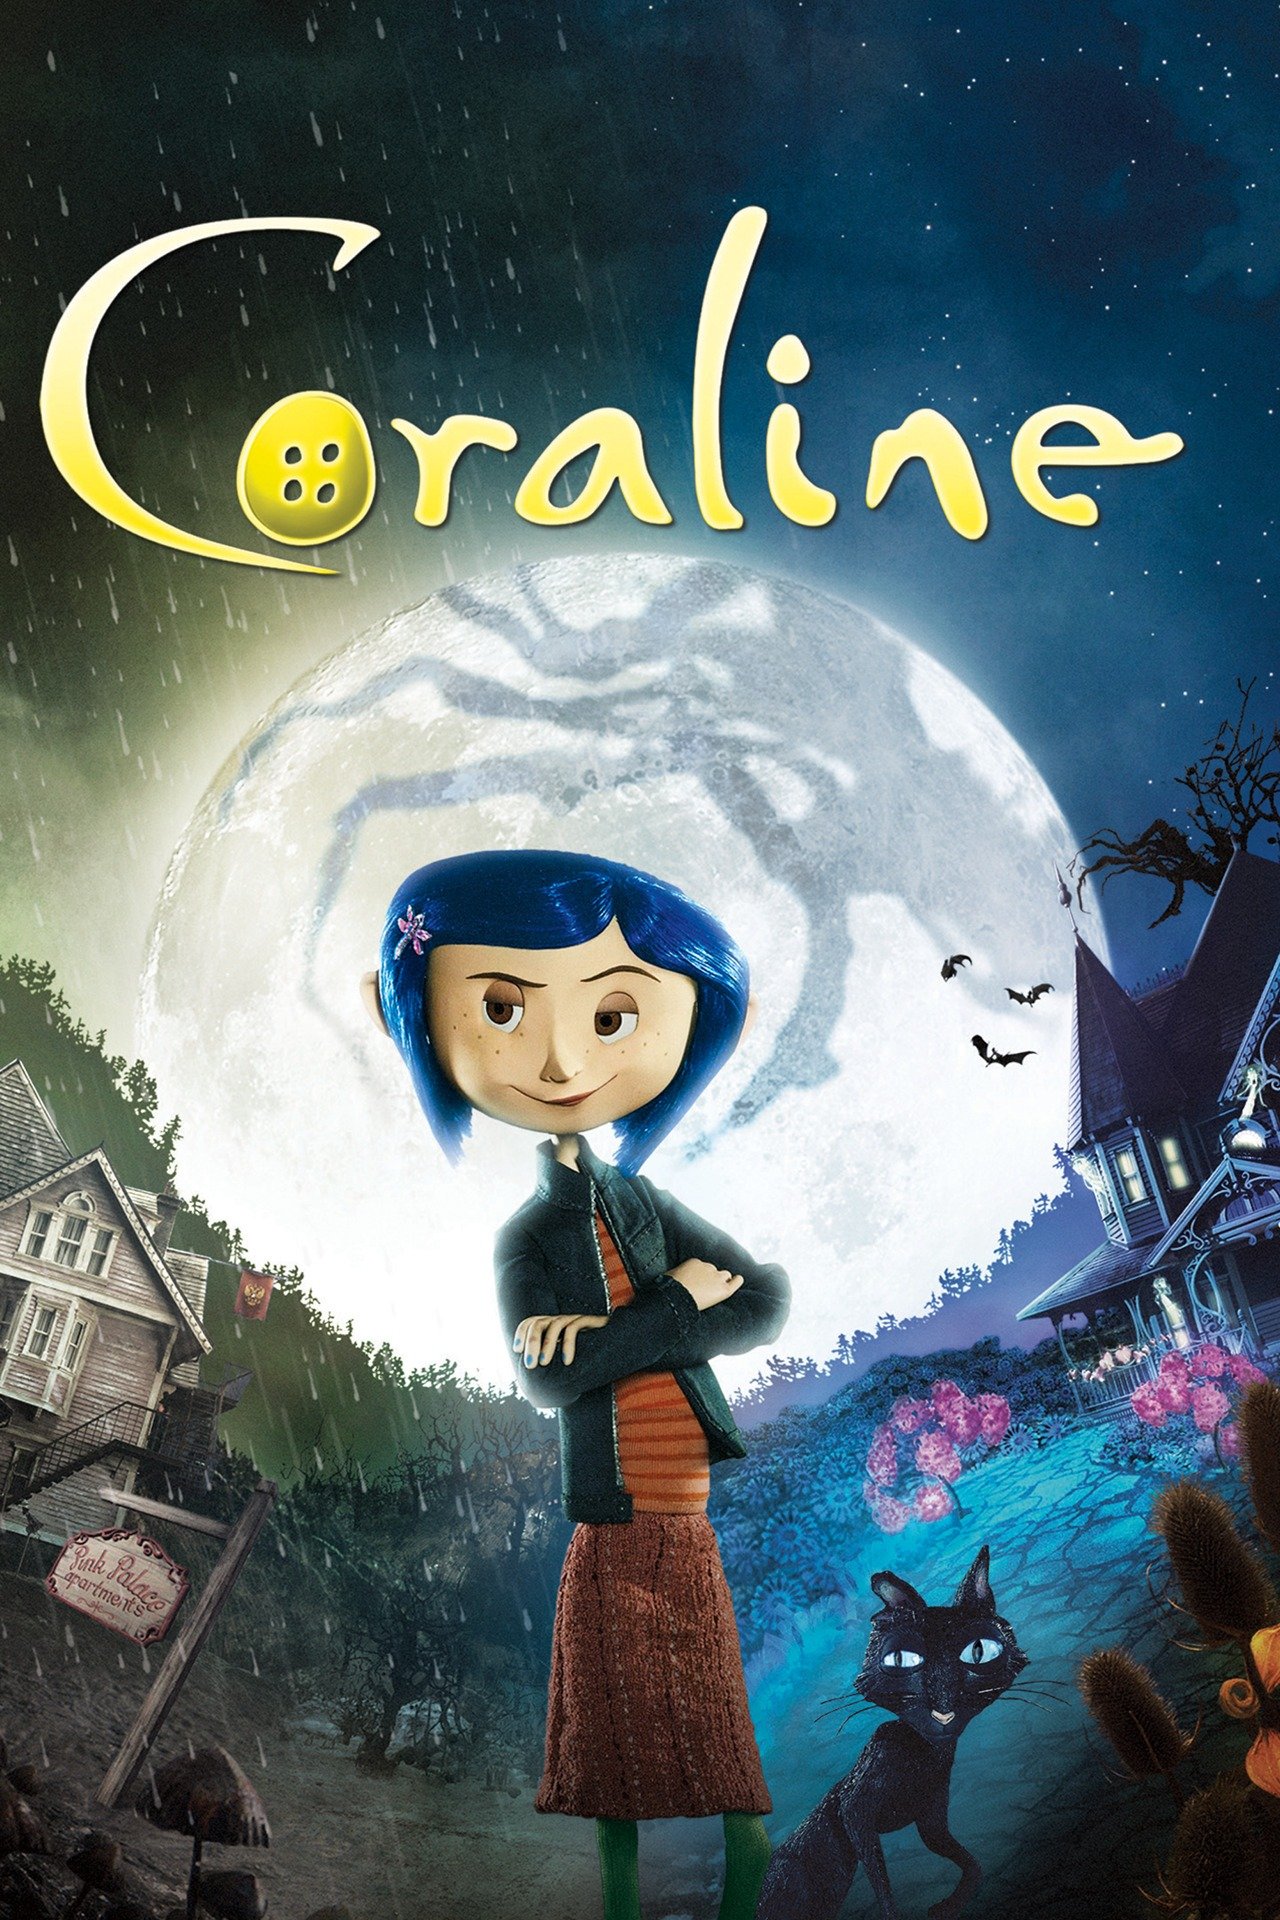 Valley Mall Coraline